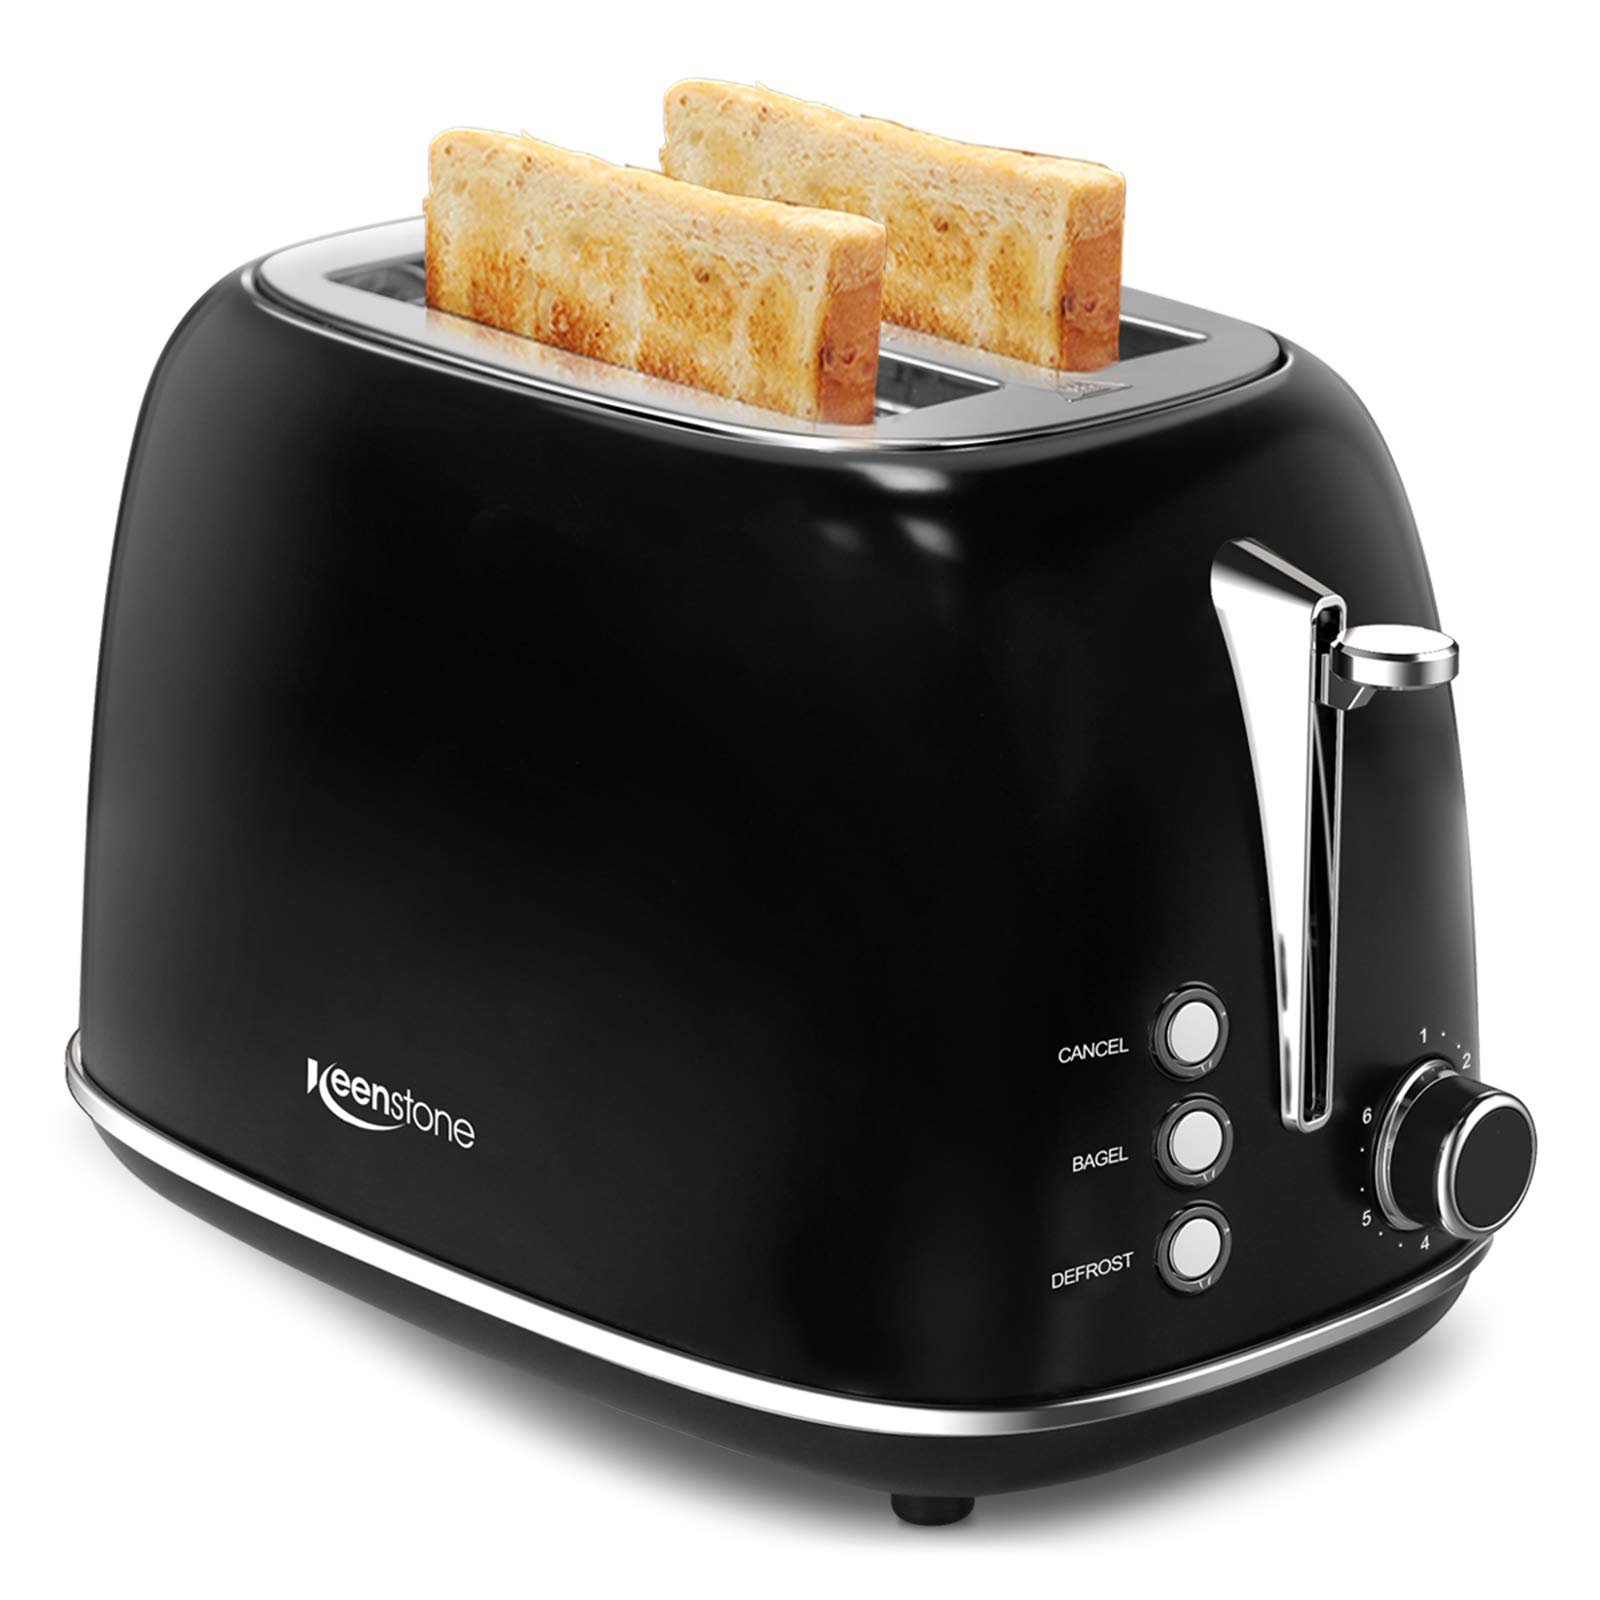 Toaster 2 Slice Stainless Steel Toaster Retro with 6 Bread Shade Settings